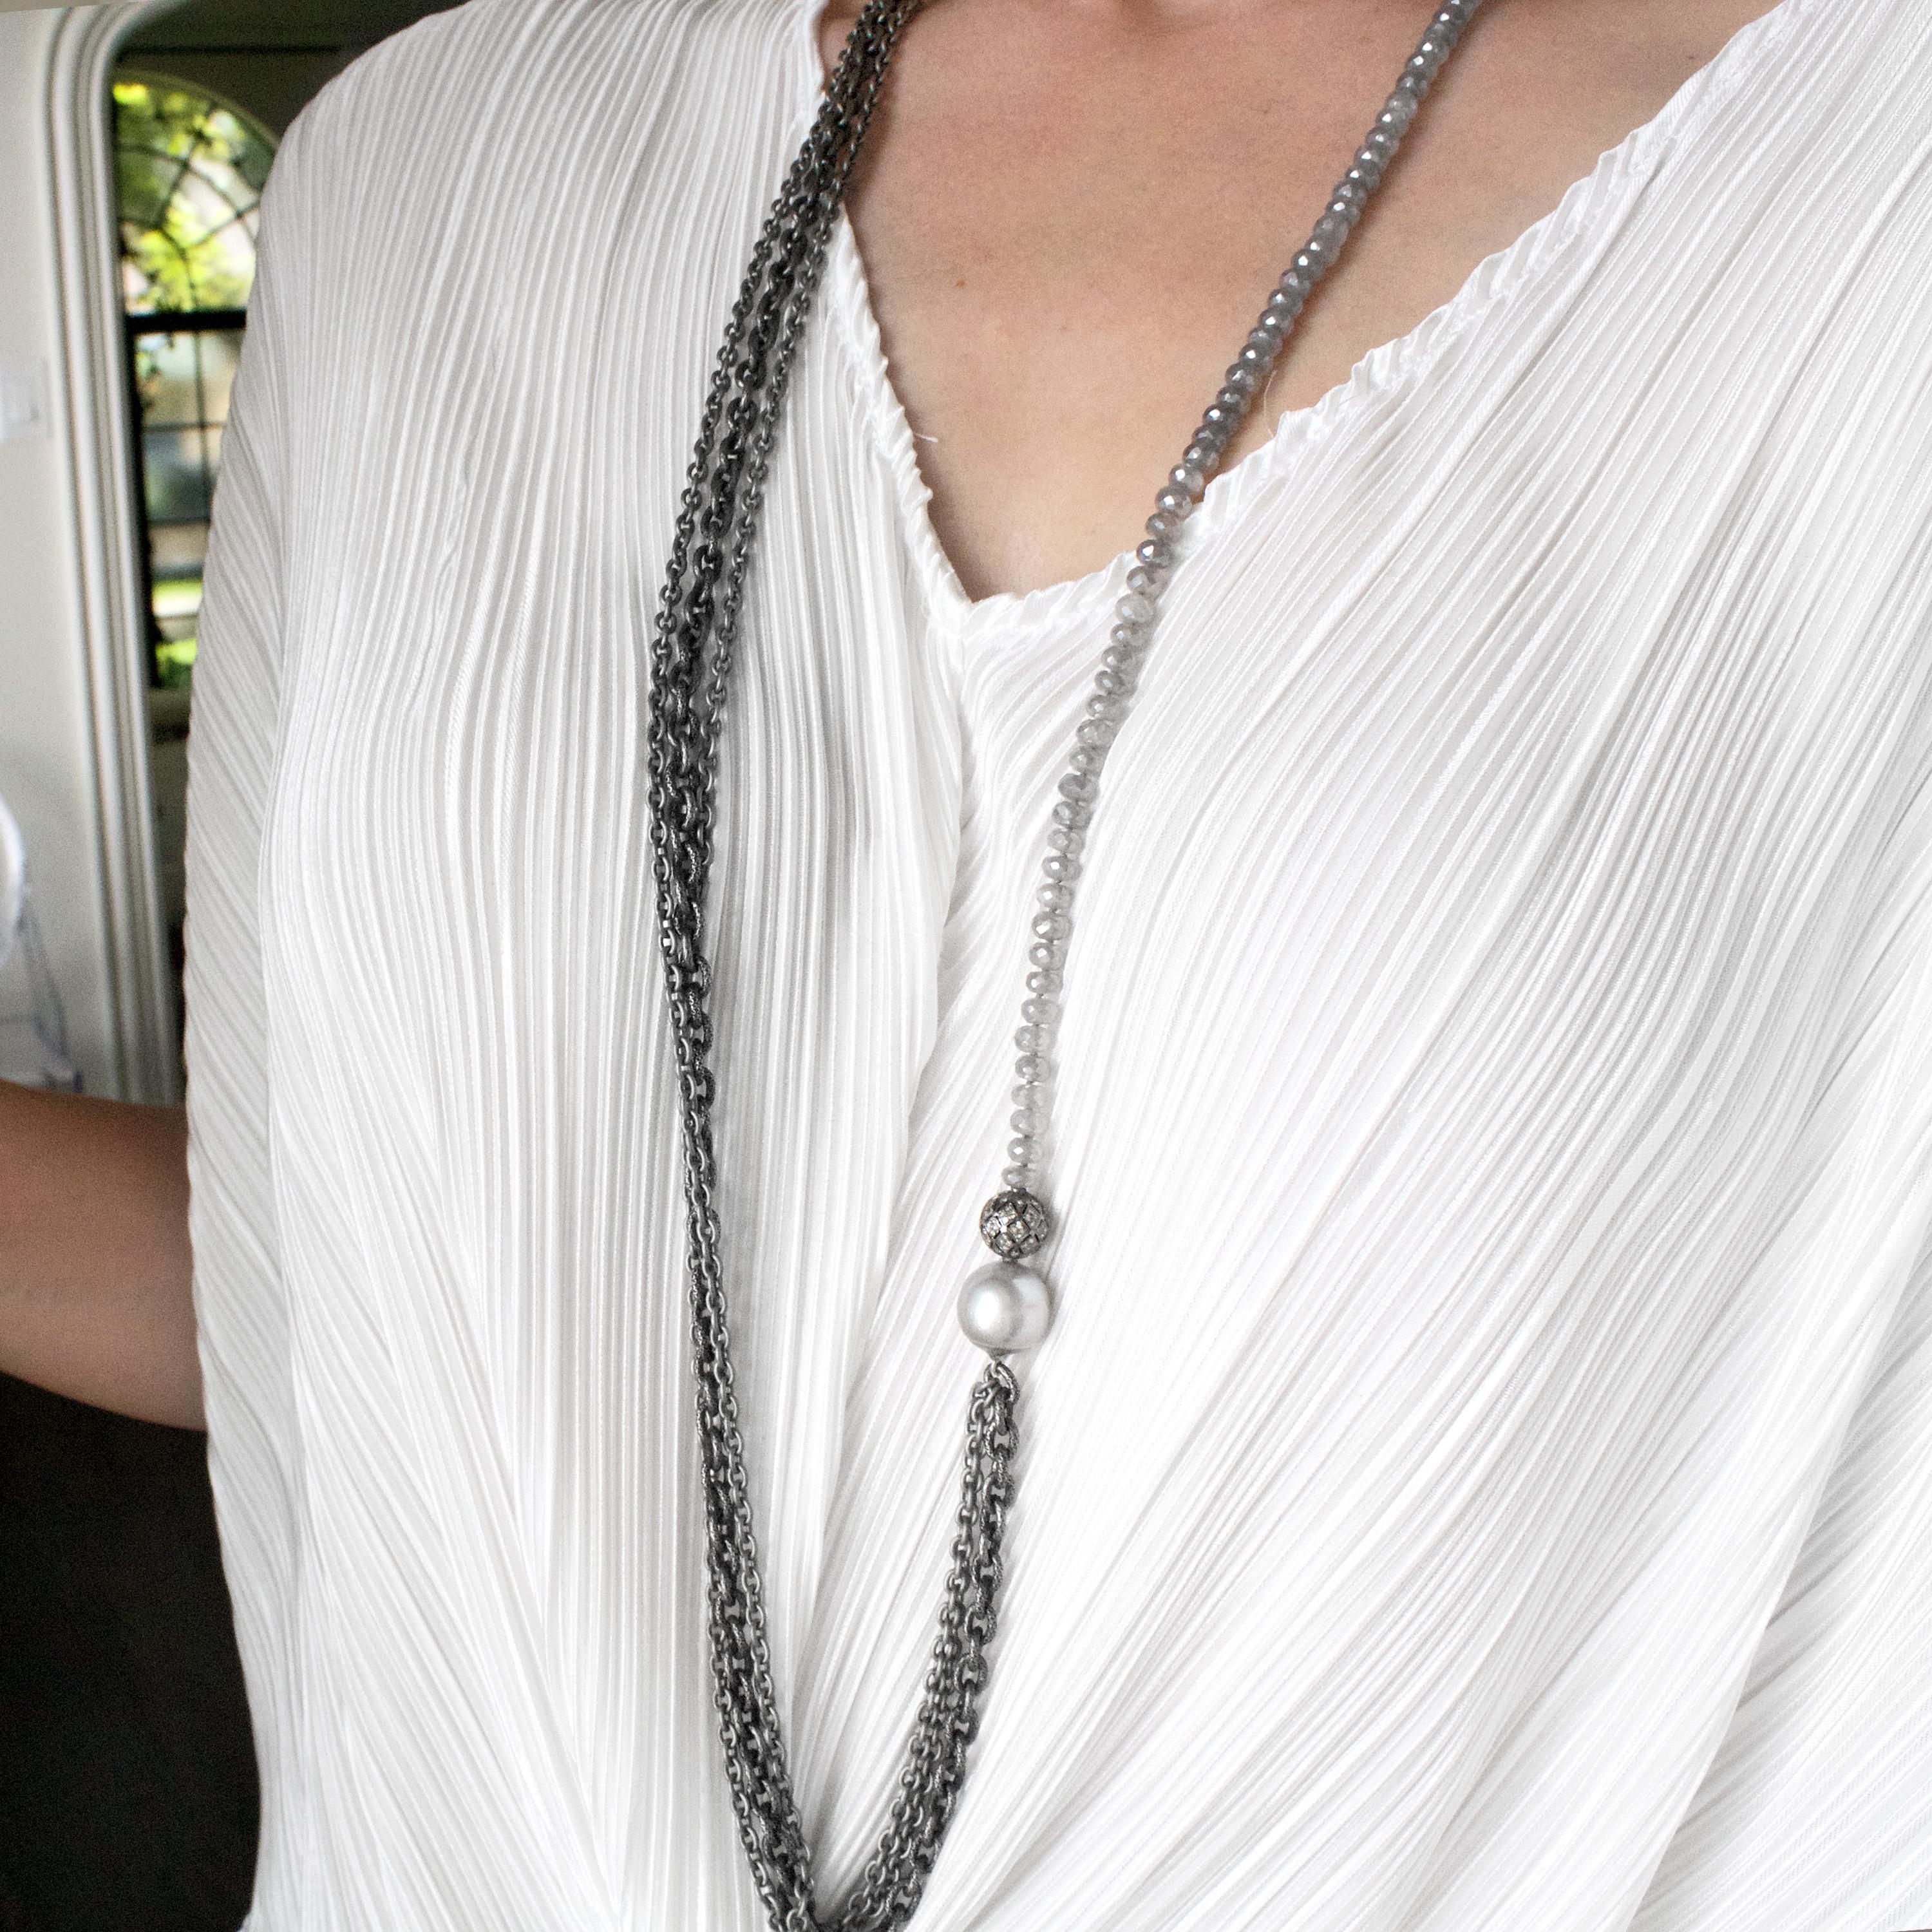 Long Triple Chain Necklace Necklace handcrafted by jewelry artist Liza Beth featuring a strand of faceted gray moonstones accented by a Tahitian pearl and an inlaid-diamond filigree bead in oxidized sterling silver, strung on a stainless steel